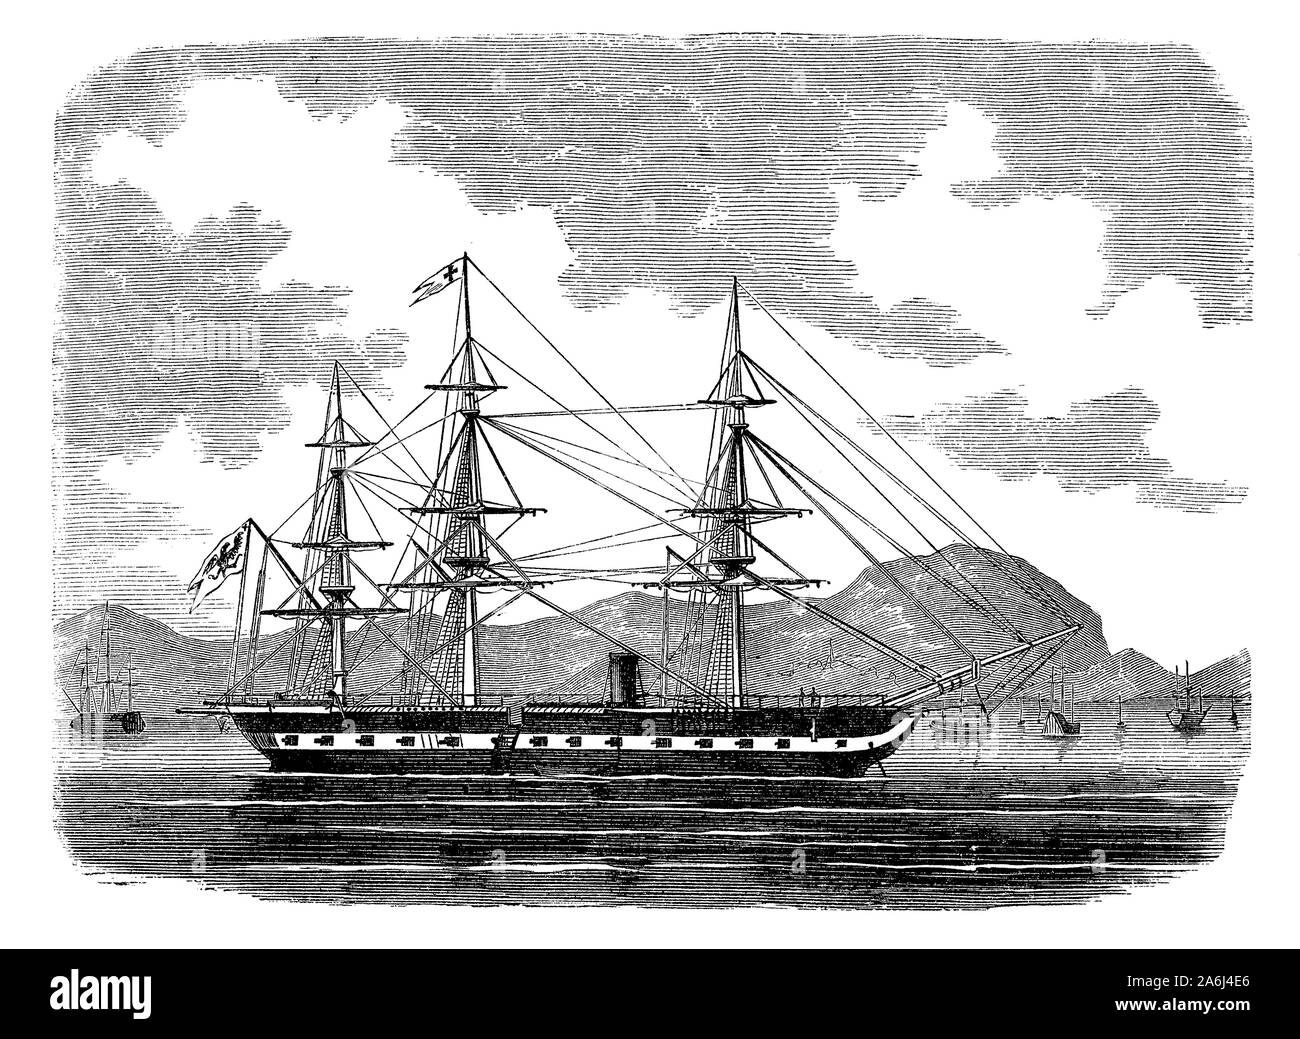 SMS Arcona German steam corvette completed in 1886, combination of steam and sail power for extended range patrol with 18 cannons Stock Photo